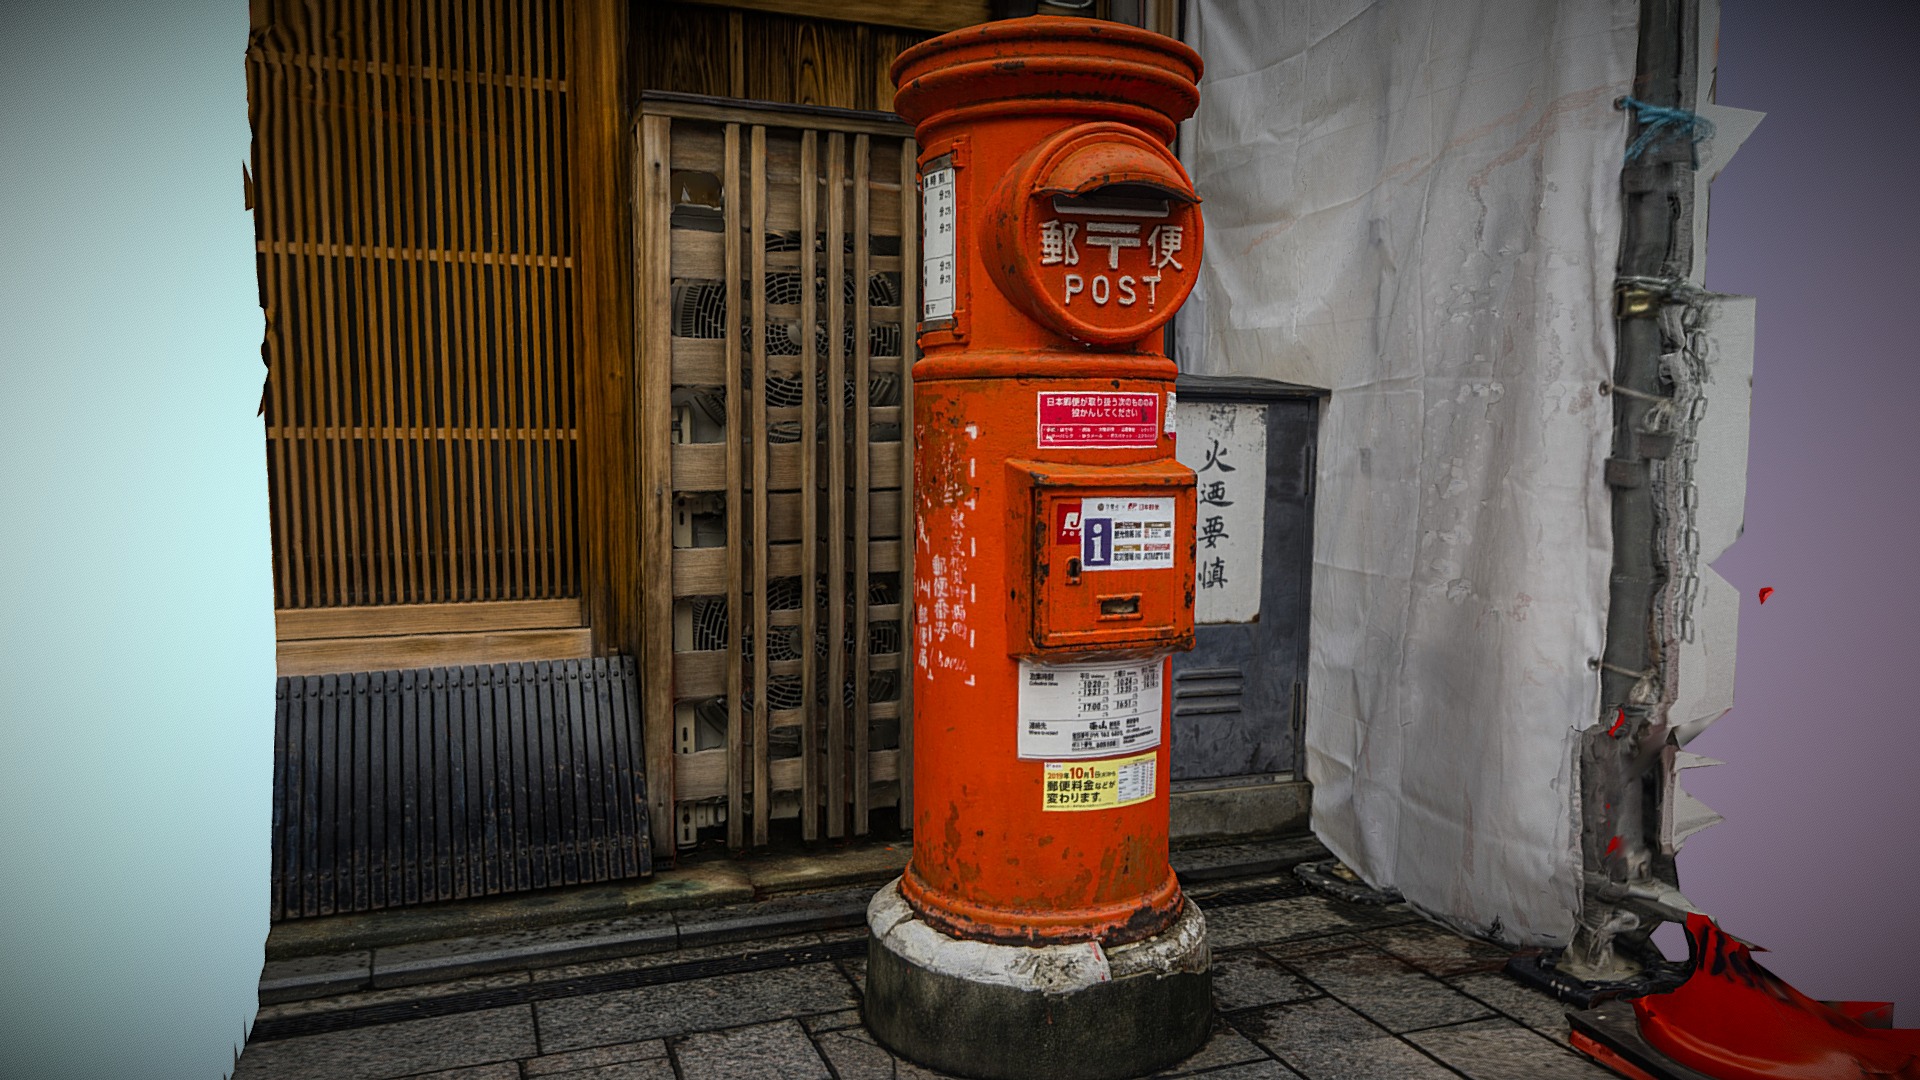 3D model Japanese mailbox photogrammetry scan high poly - This is a 3D model of the Japanese mailbox photogrammetry scan high poly. The 3D model is about a fire hydrant on the sidewalk.